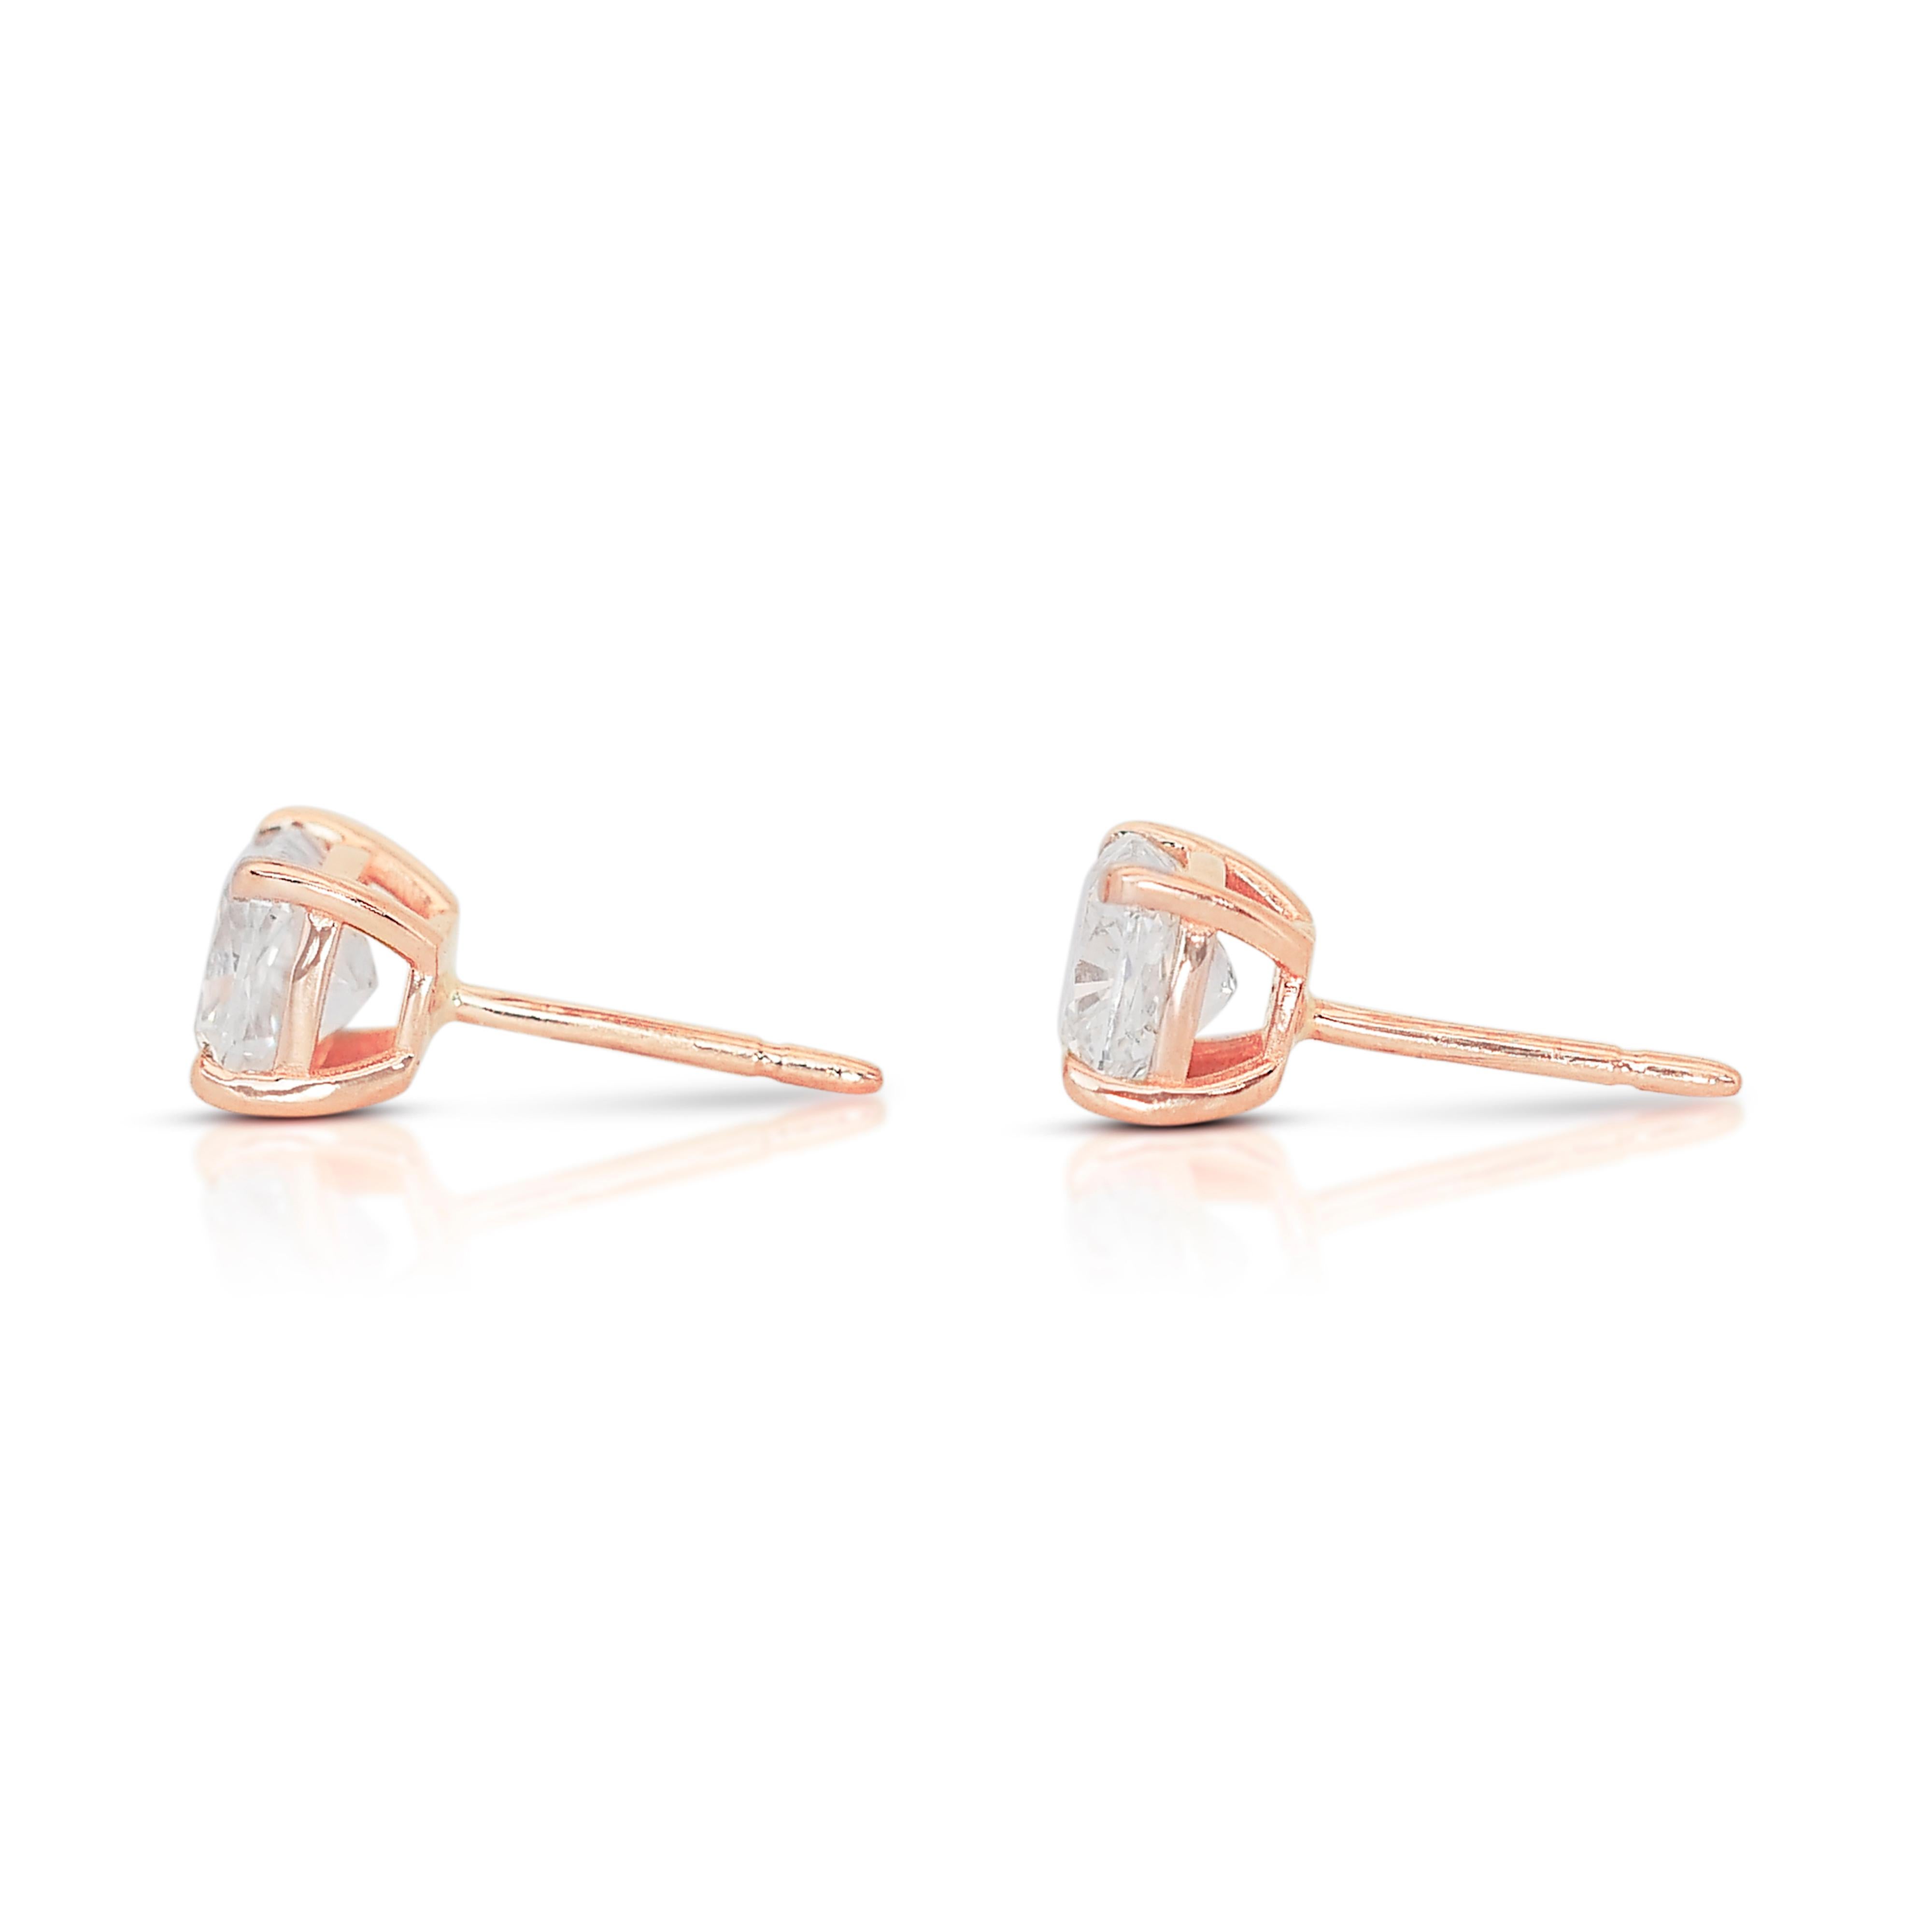 Luxurious 1.68ct Diamond Stud Earrings in 14k Rose Gold - IGI Certified In New Condition For Sale In רמת גן, IL